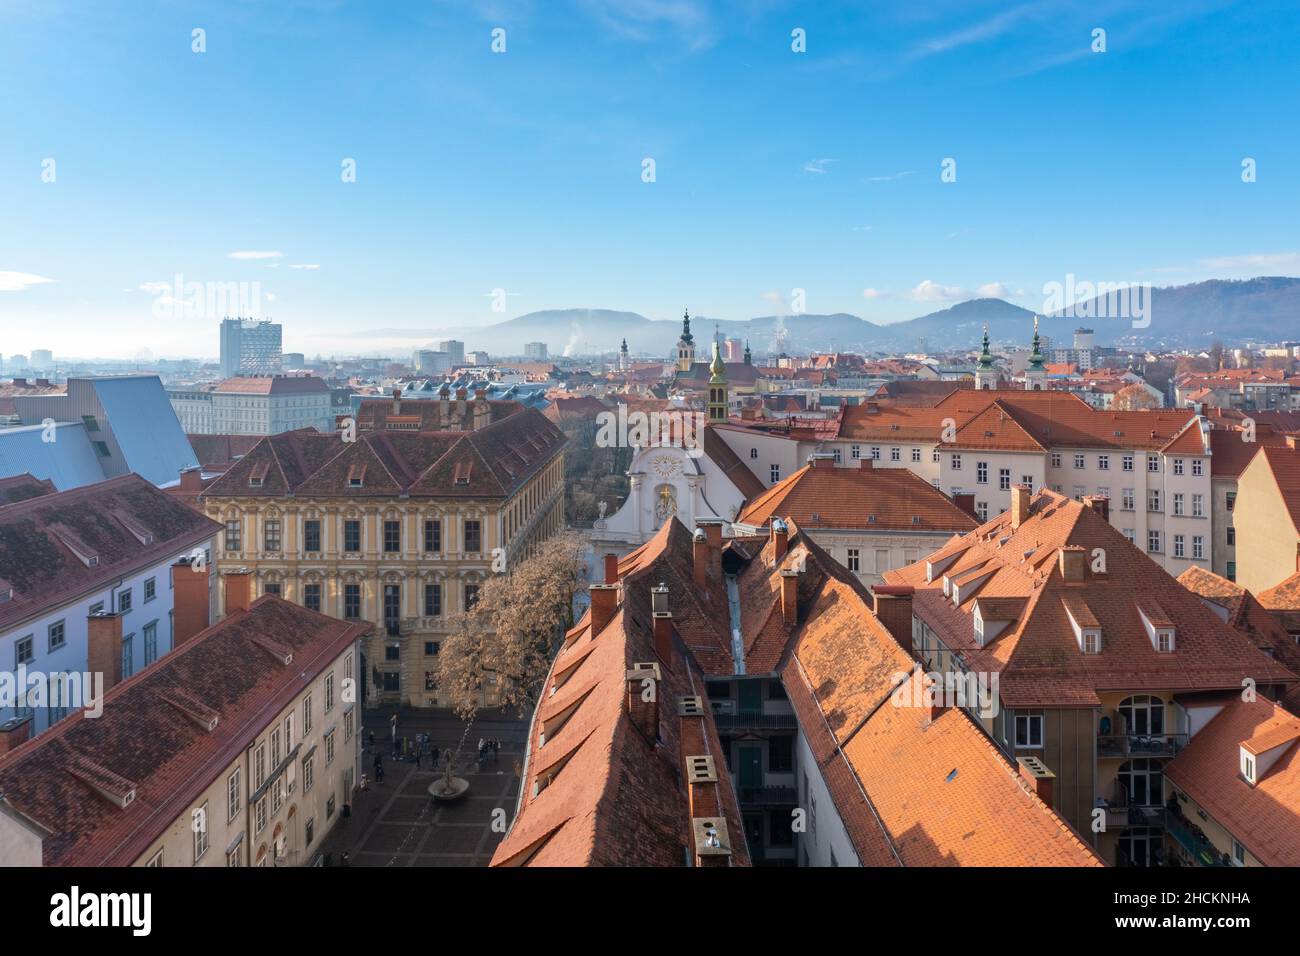 Graz Schlossbergplatz. Architecture of the capital city of Styria in Austria during a cold winter day. Stock Photo